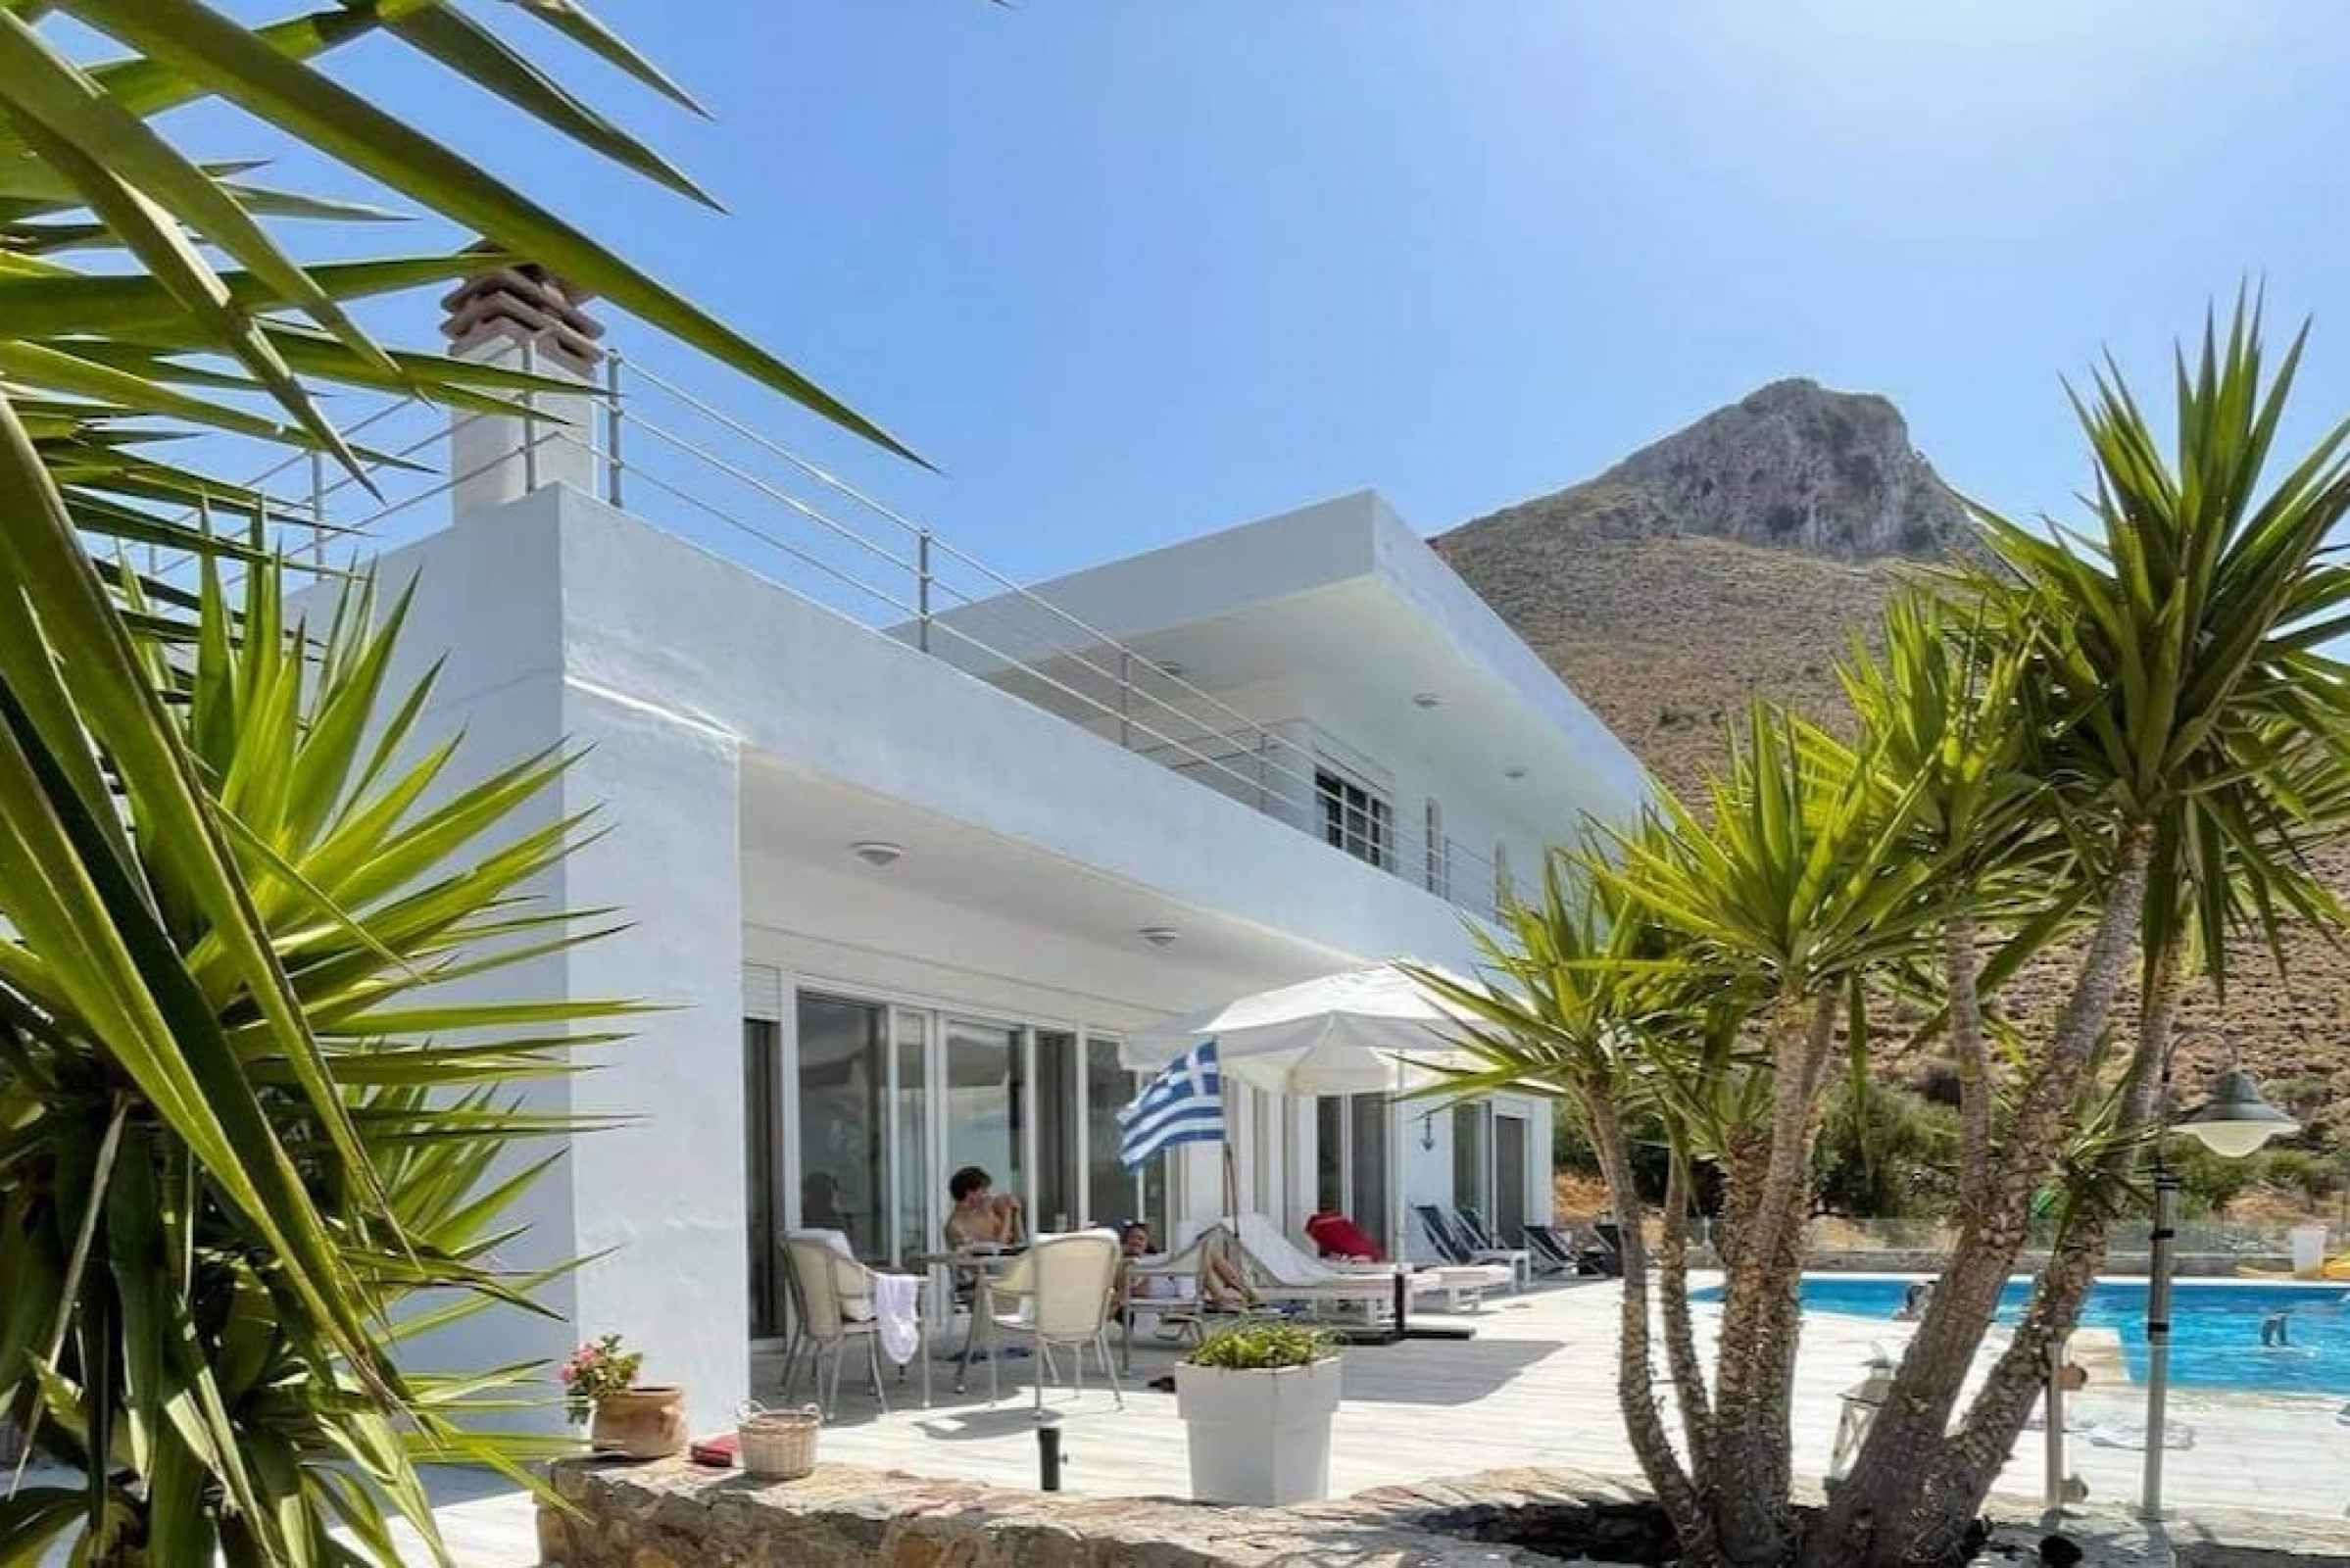 Property Image 2 - Villa located at Kokkino Chorio has one of the most outstanding sea views.